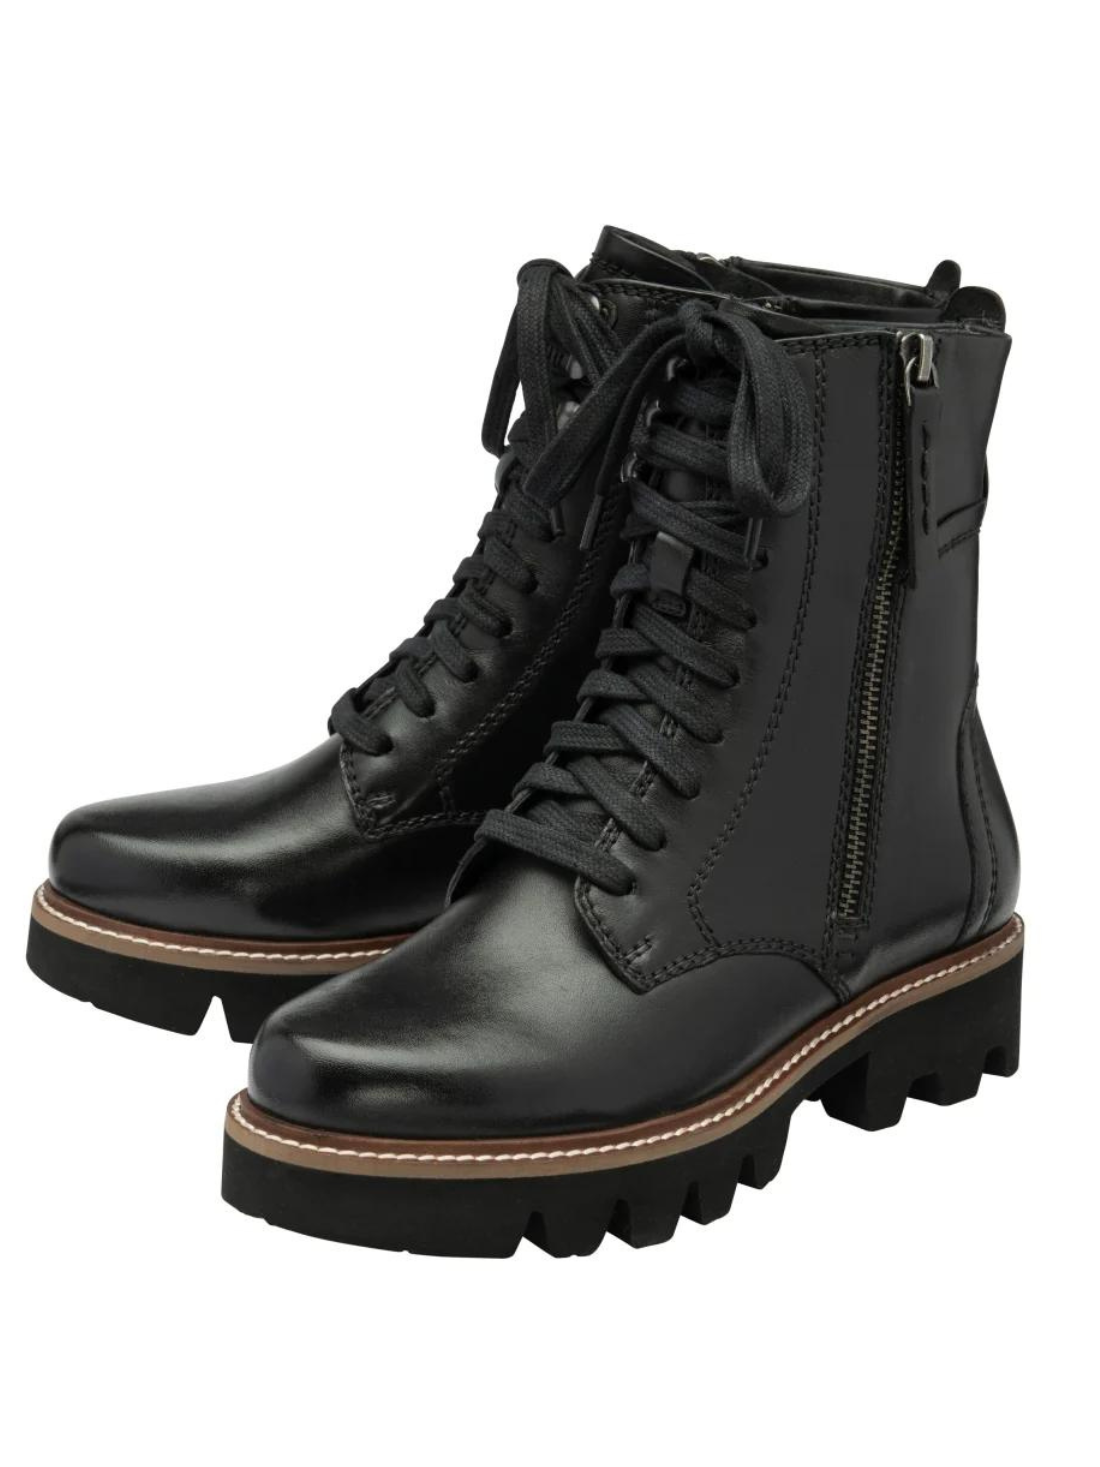 Ravel Dyce black leather zip up ankle boot sizes 4-8